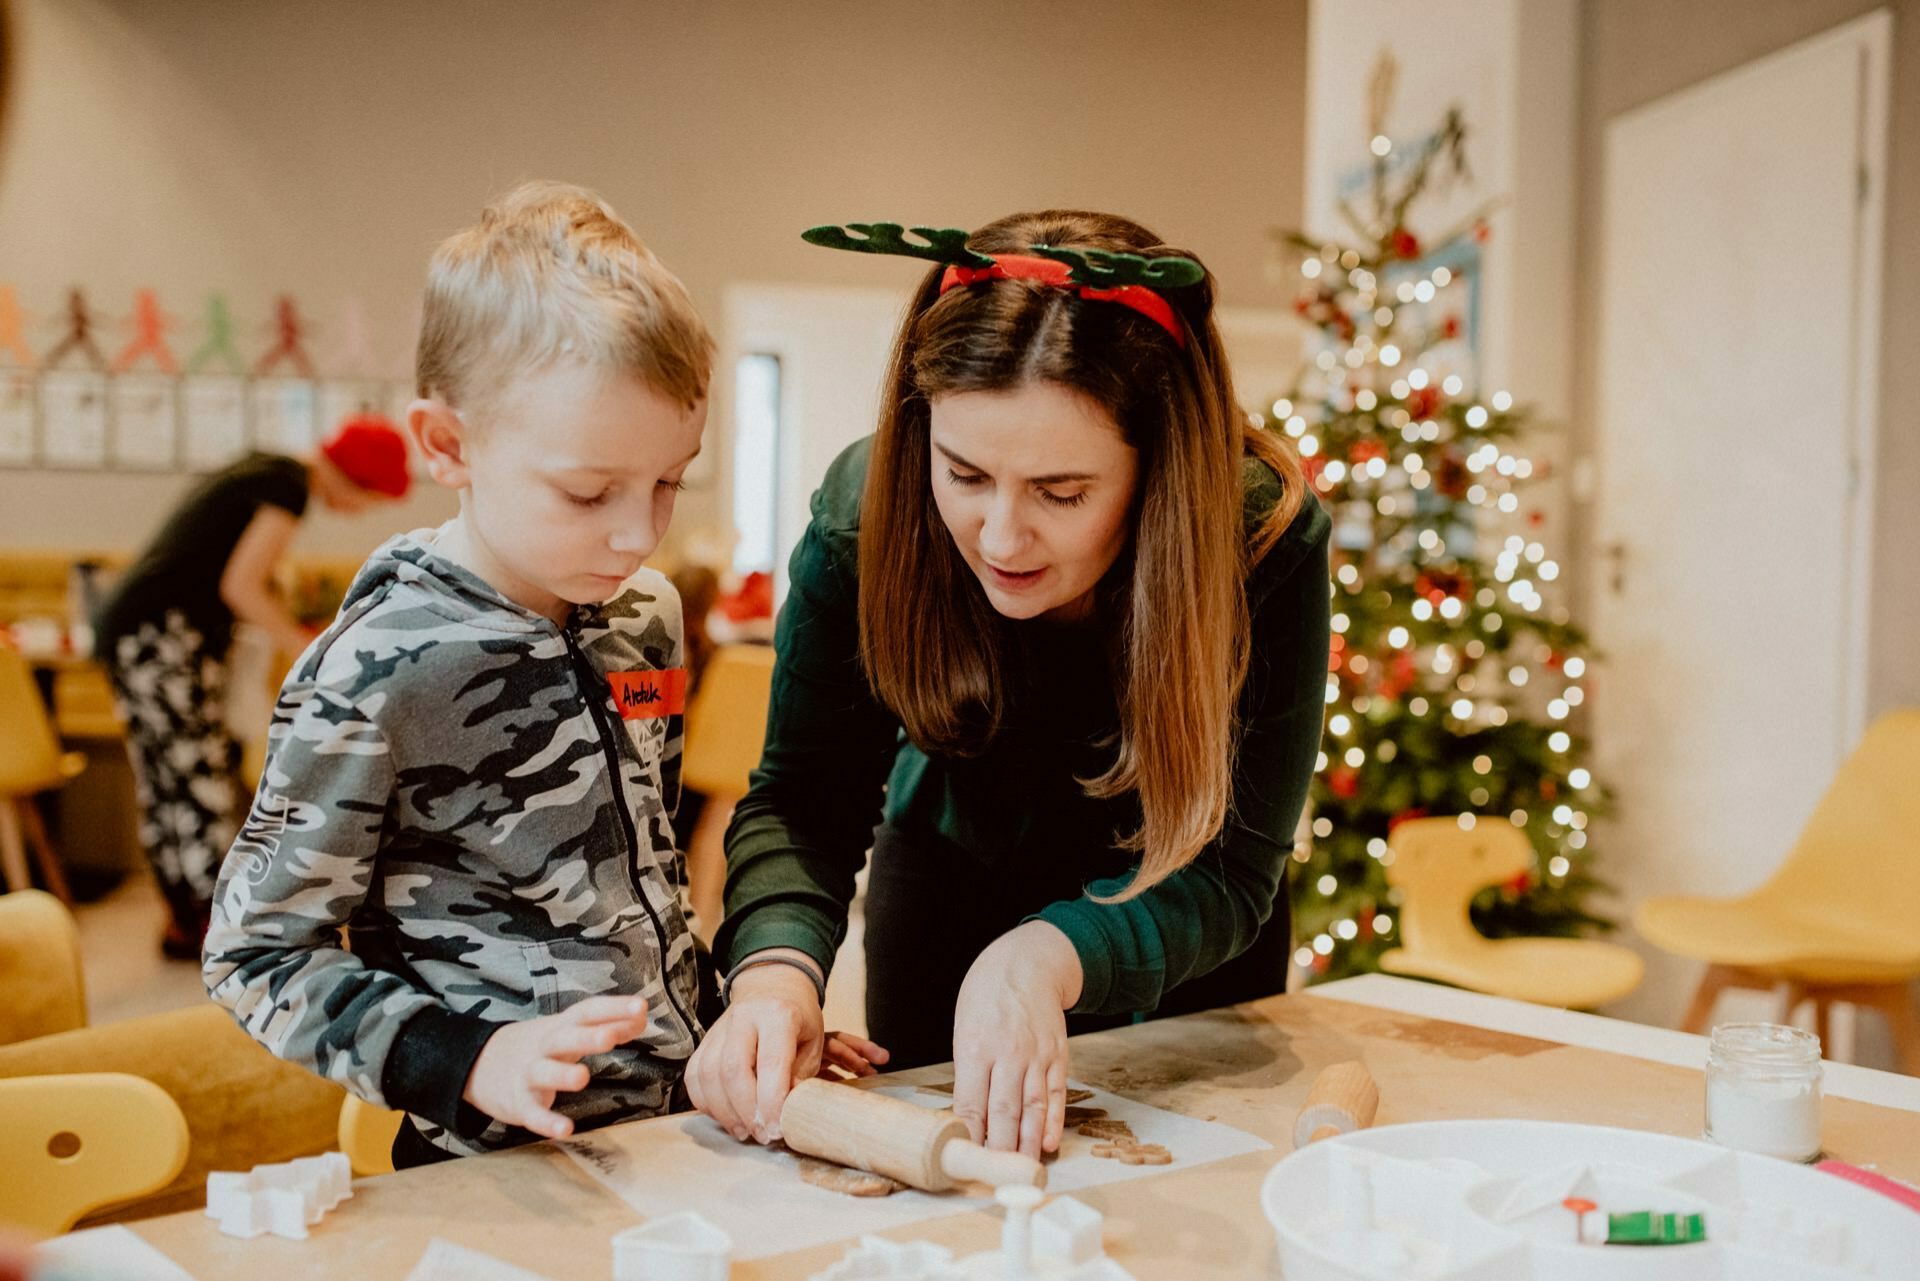 Teacher shows child how to roll Christmas gingerbread